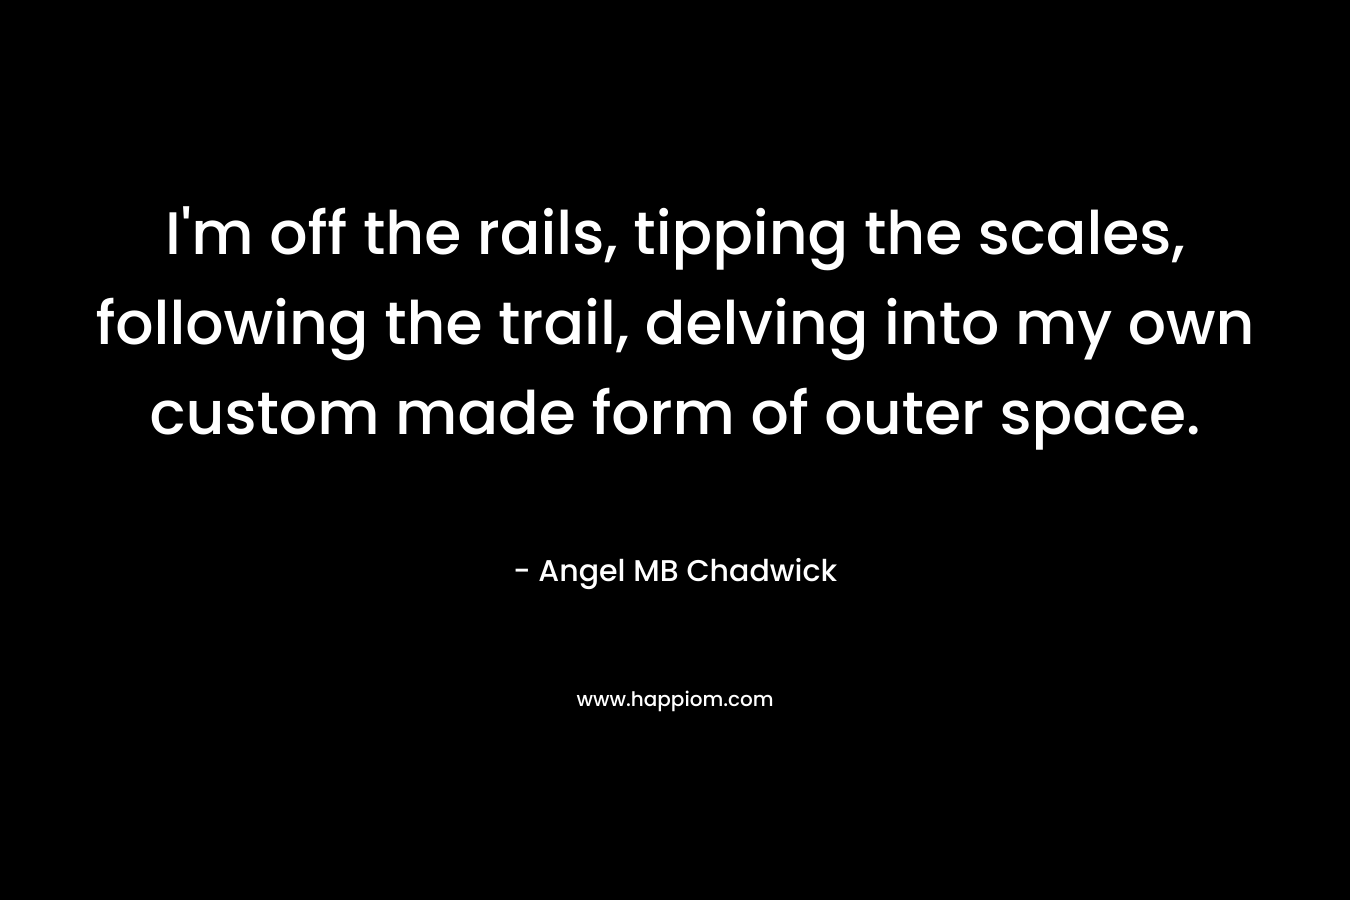 I'm off the rails, tipping the scales, following the trail, delving into my own custom made form of outer space.